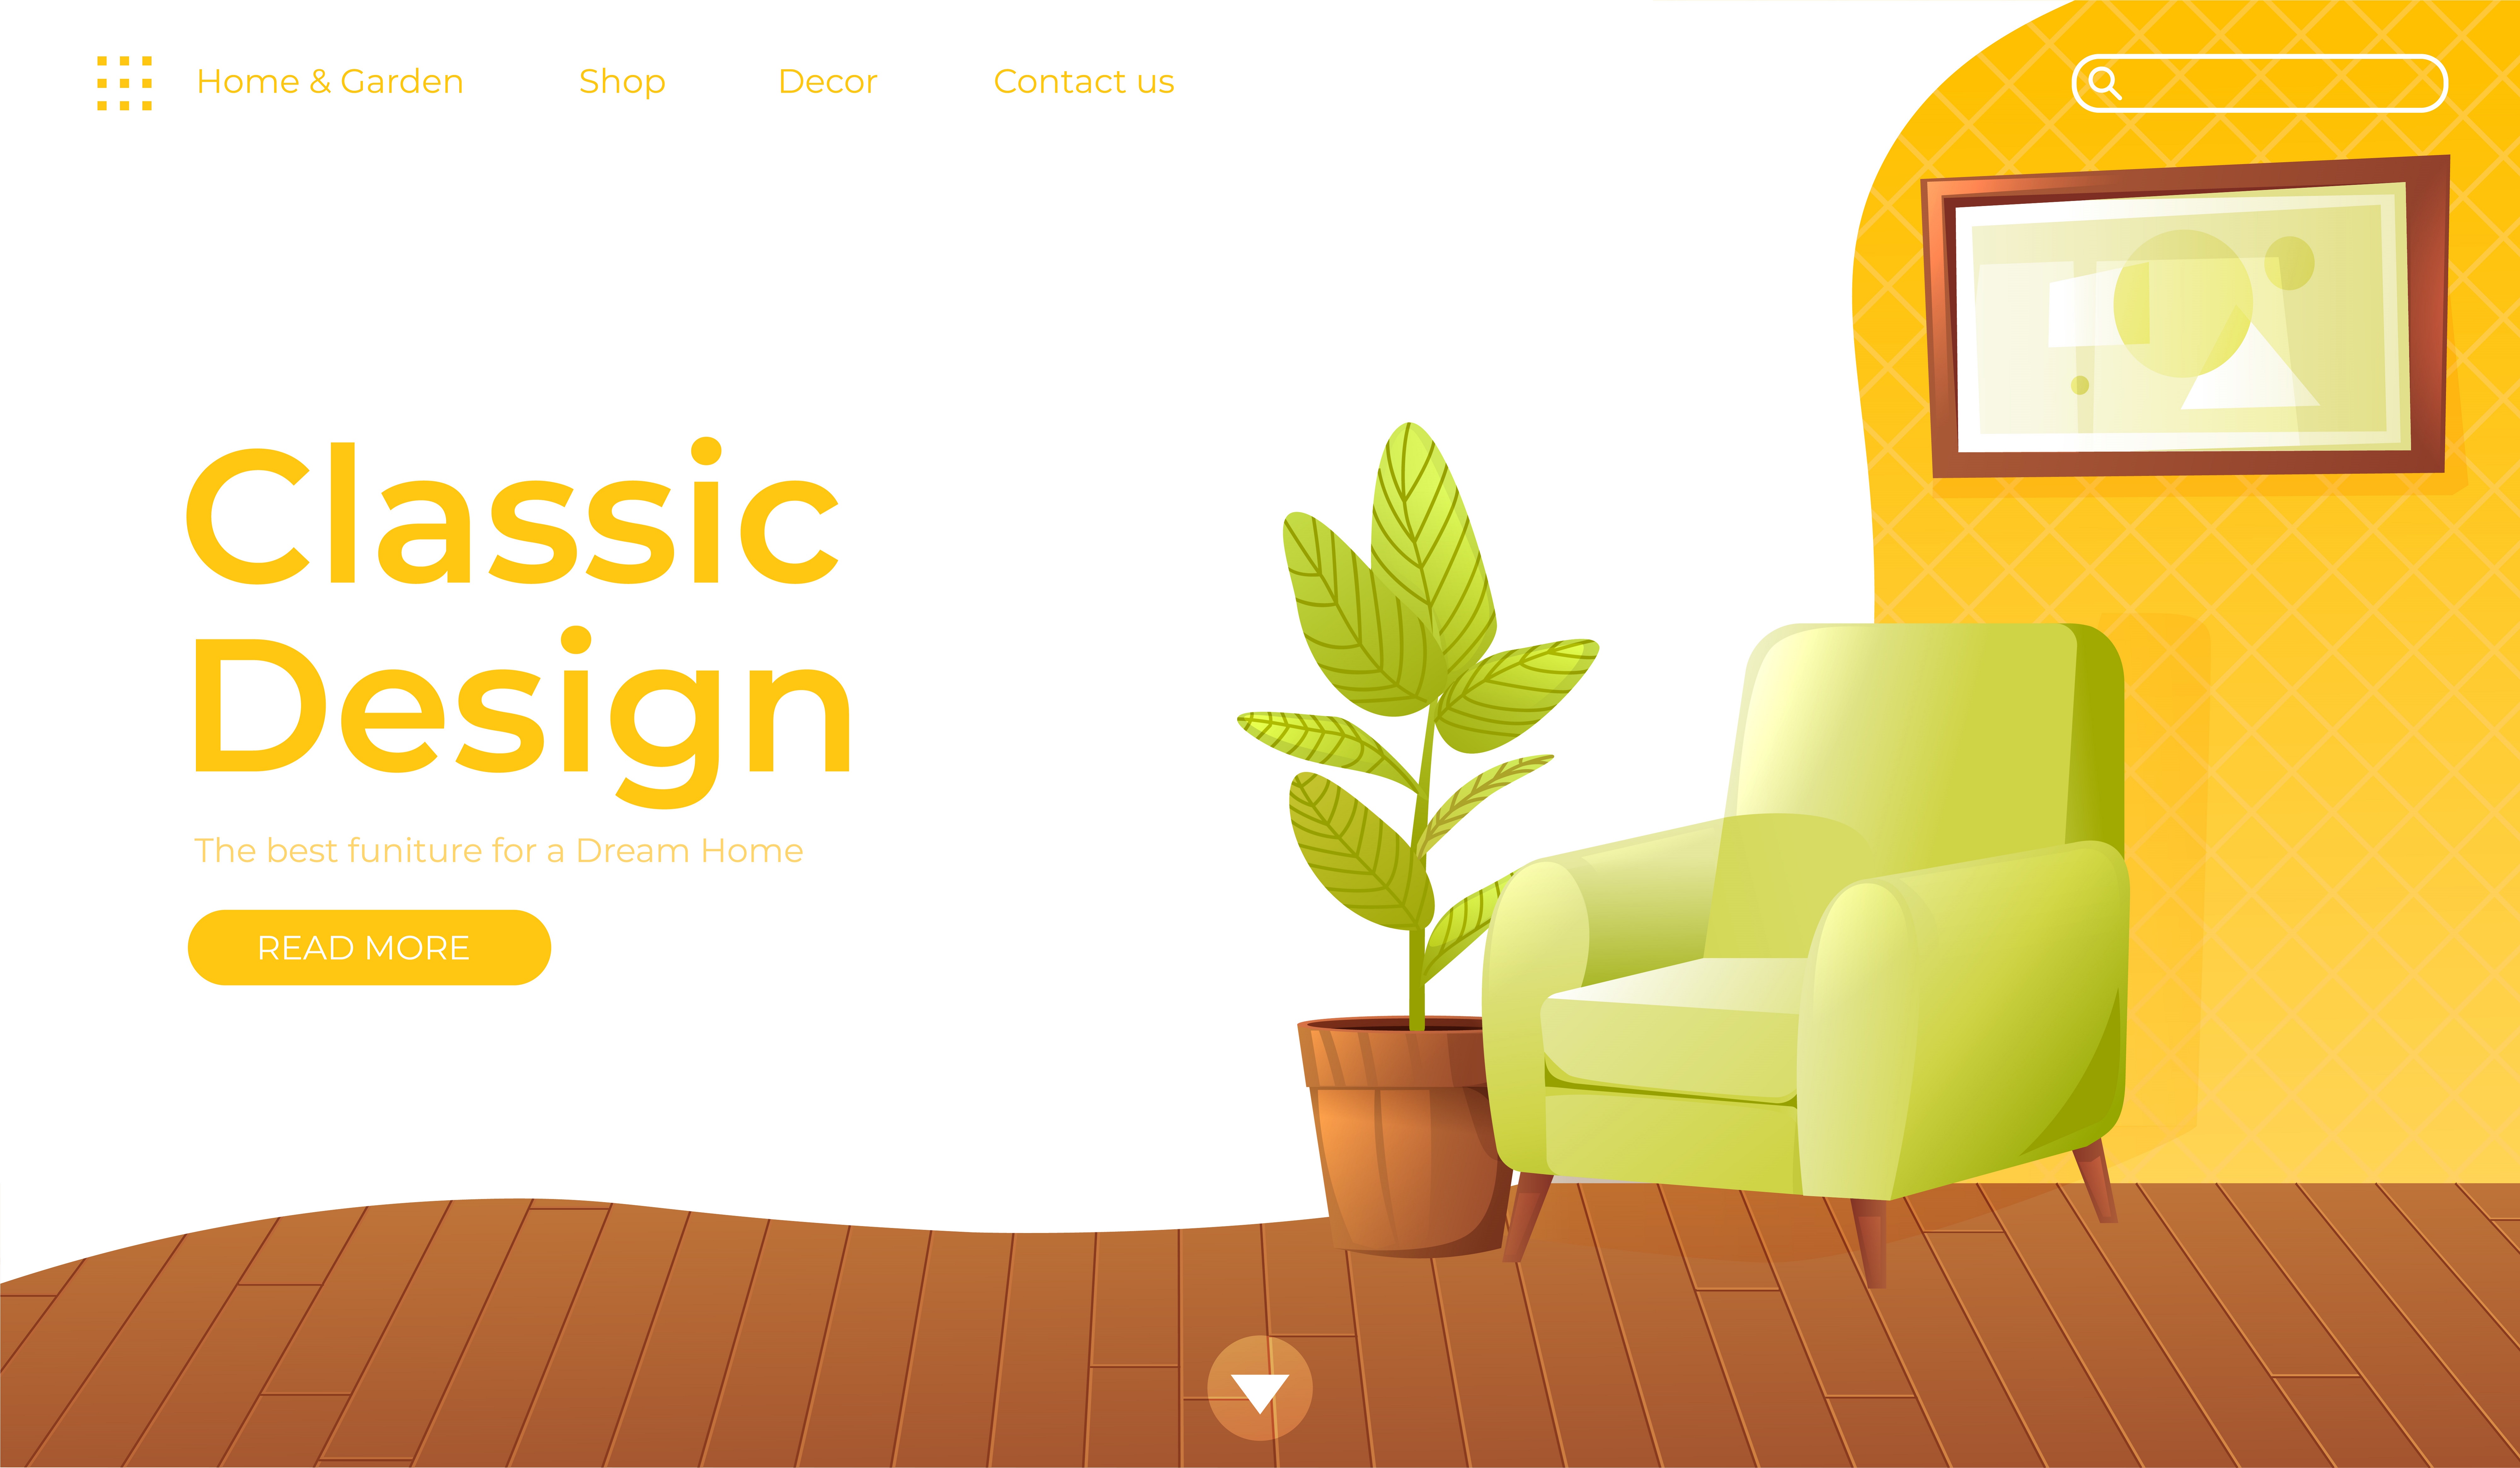 Free furniture and interior detail store, promotion, sale, ads, banner on  yellow floor and background. - Indiater